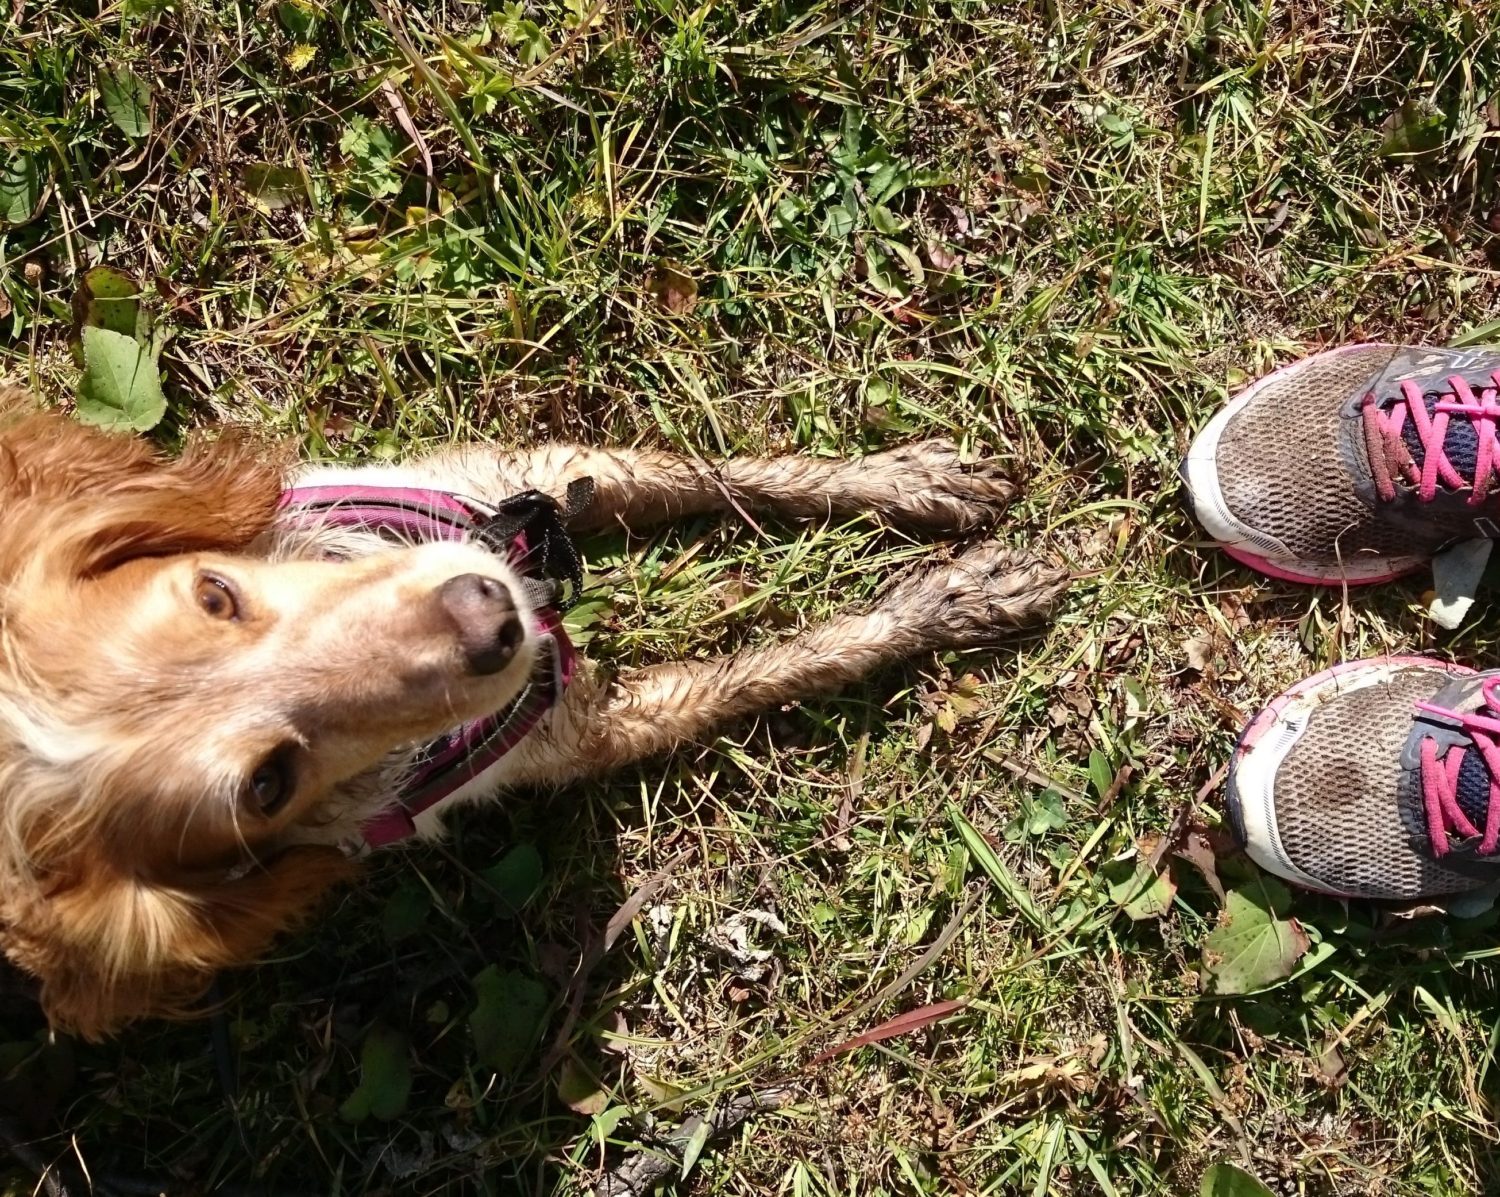 Image of Annie Dog and I on our travels. Both with muddy feet